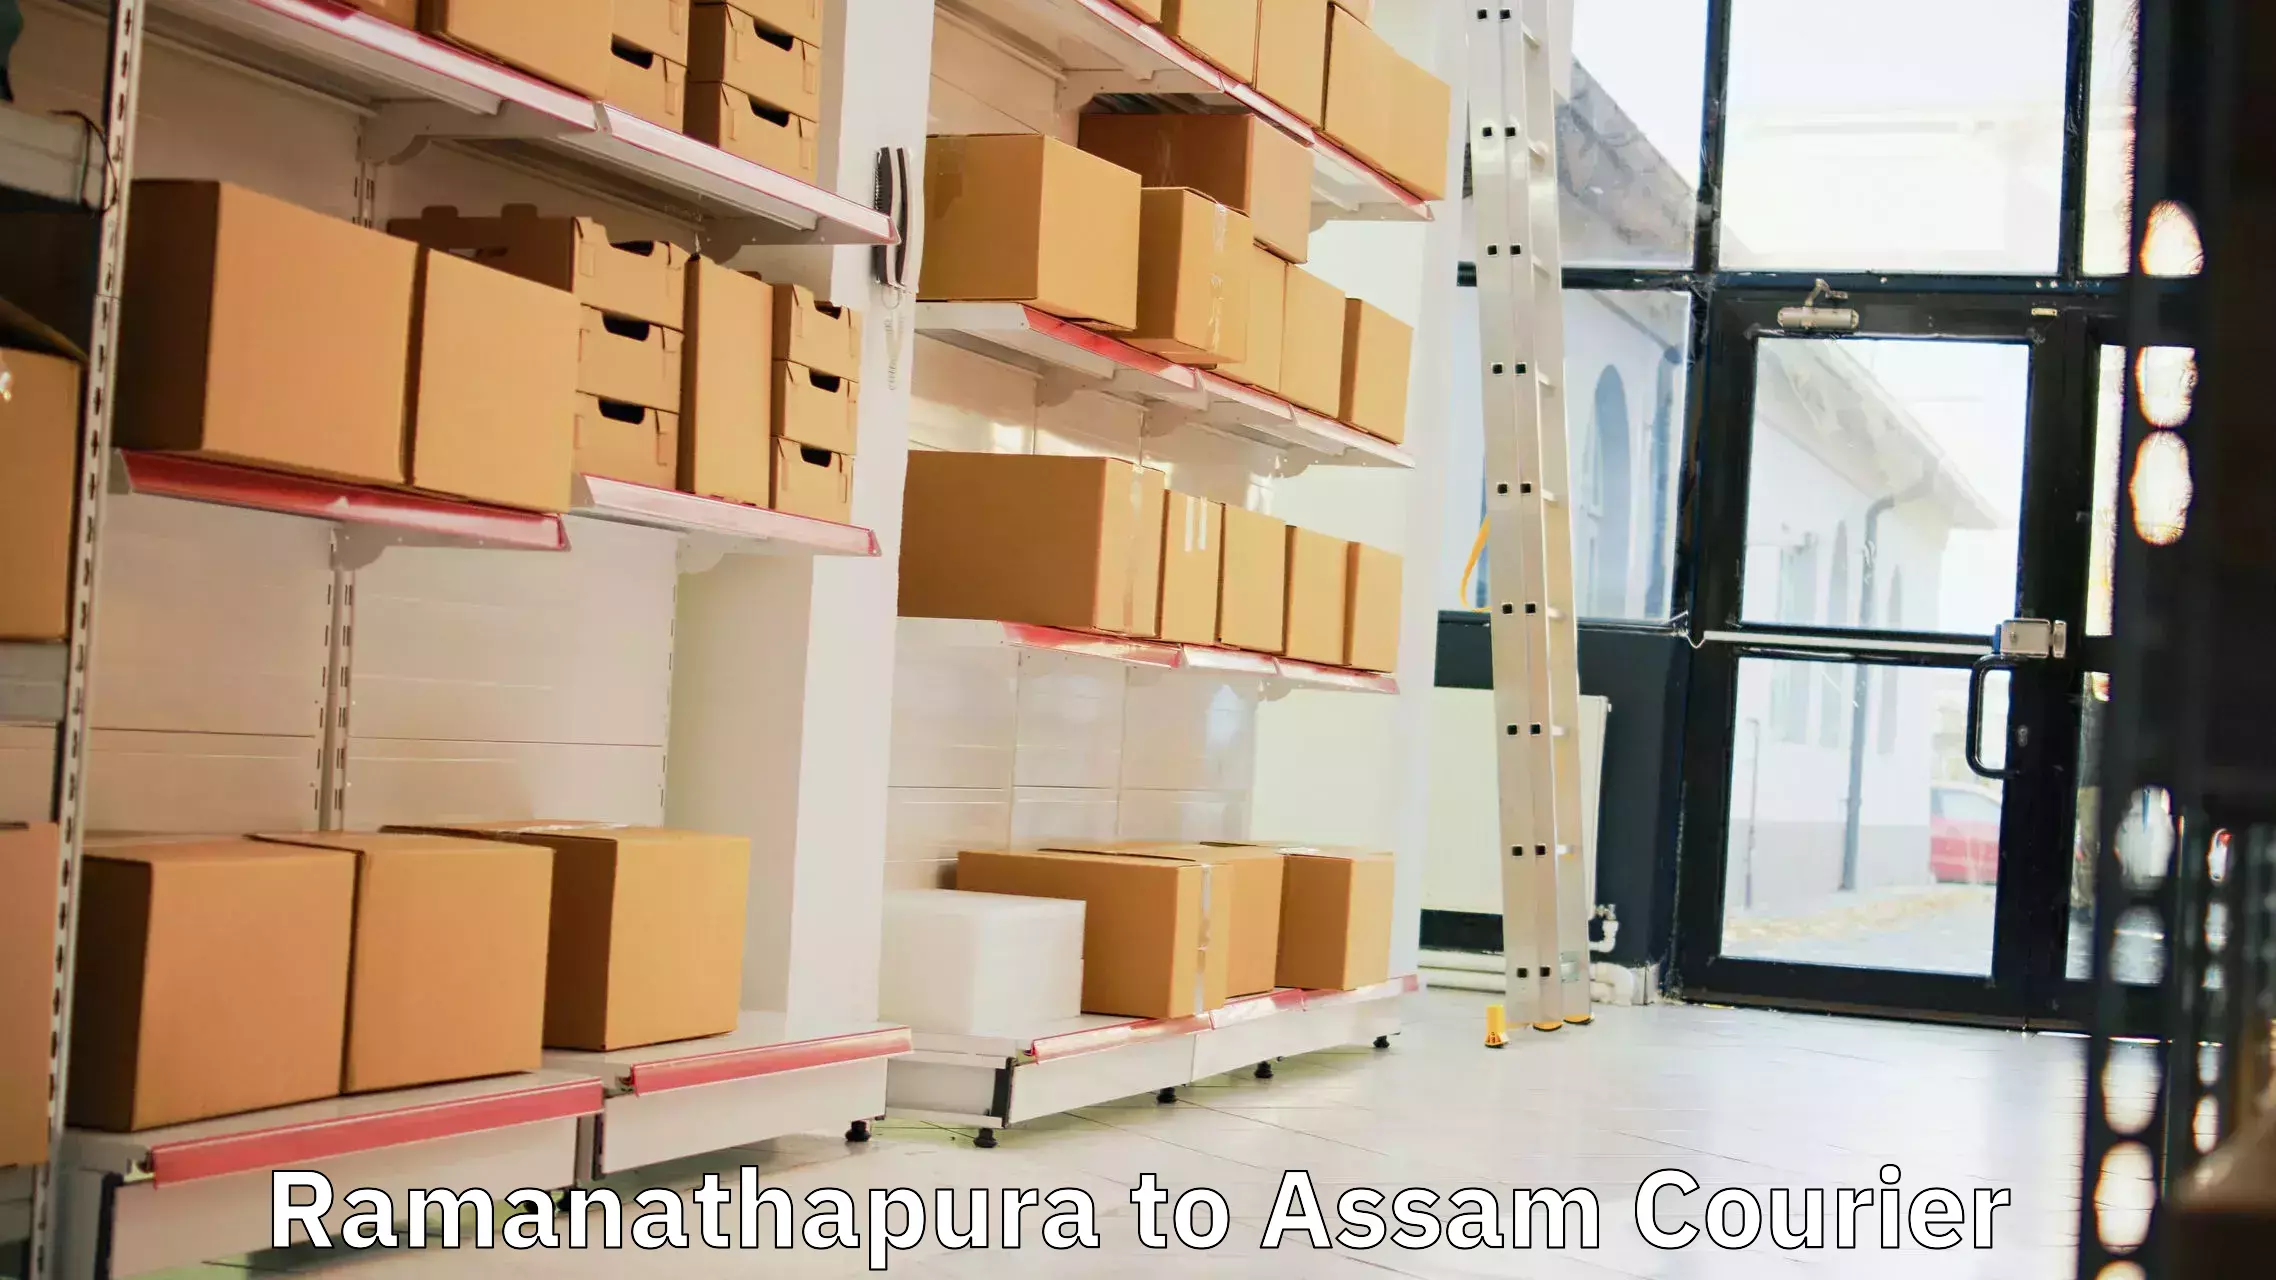 Personal courier services in Ramanathapura to Tezpur University